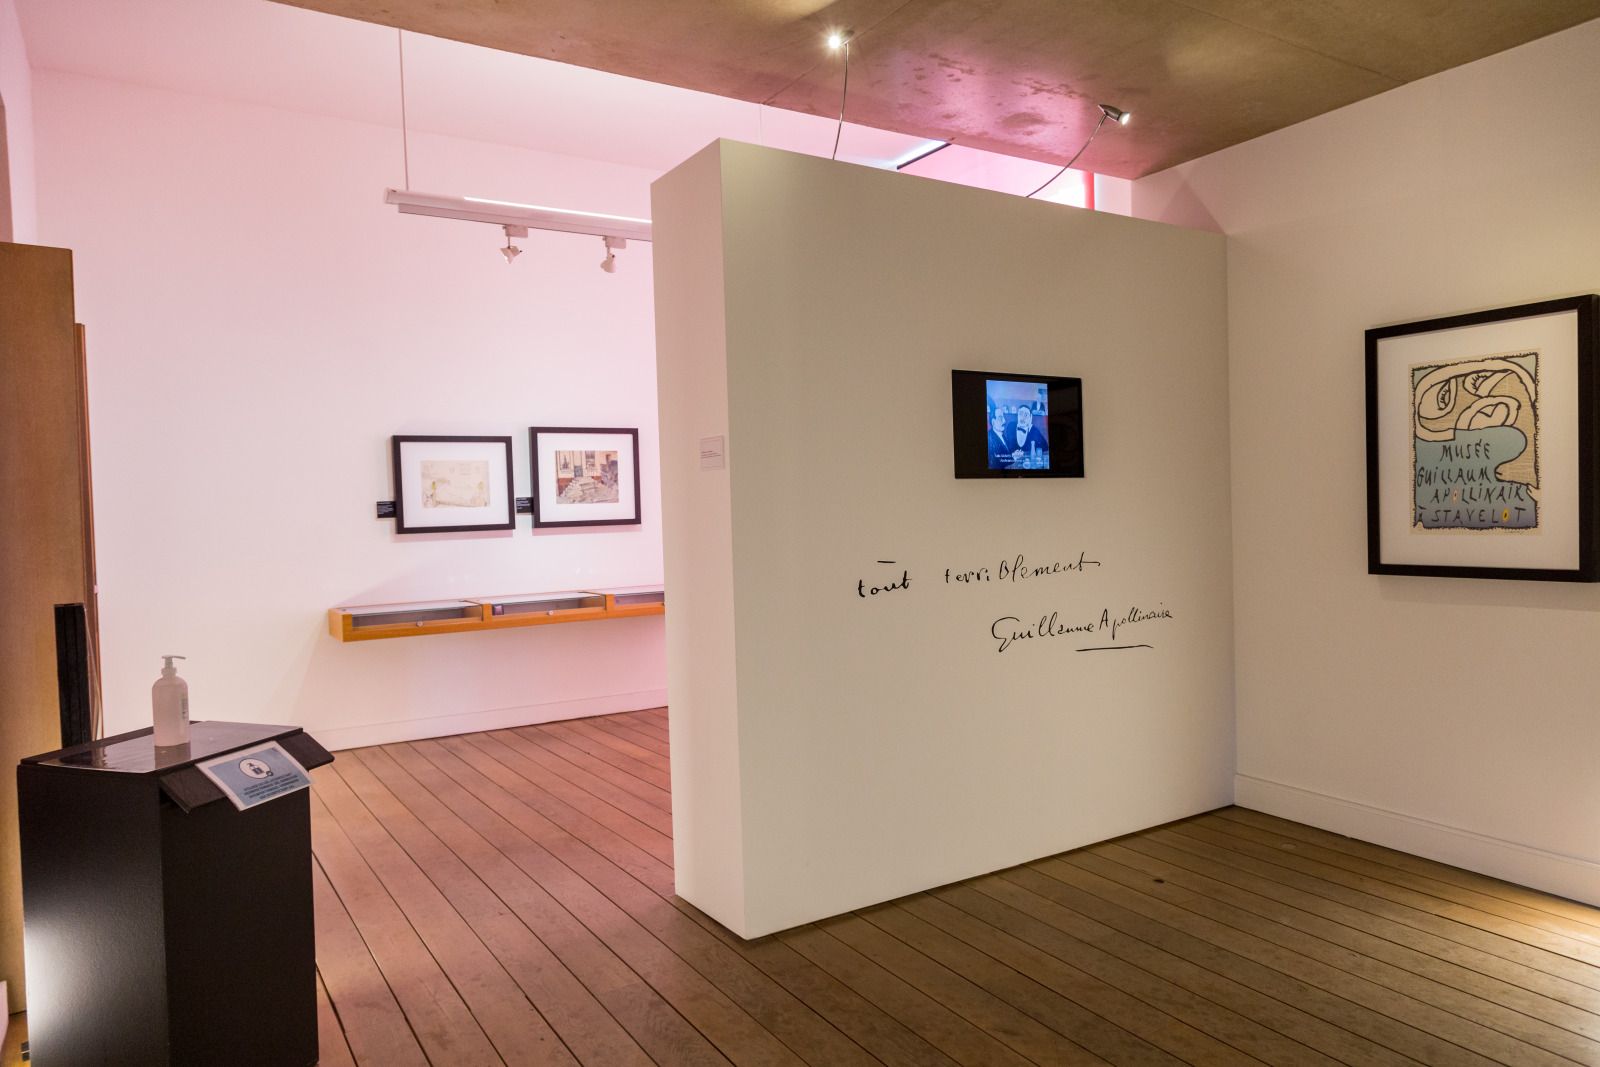 Exhibition room with writings by Guillaume Apollinaire and portraits of the artist